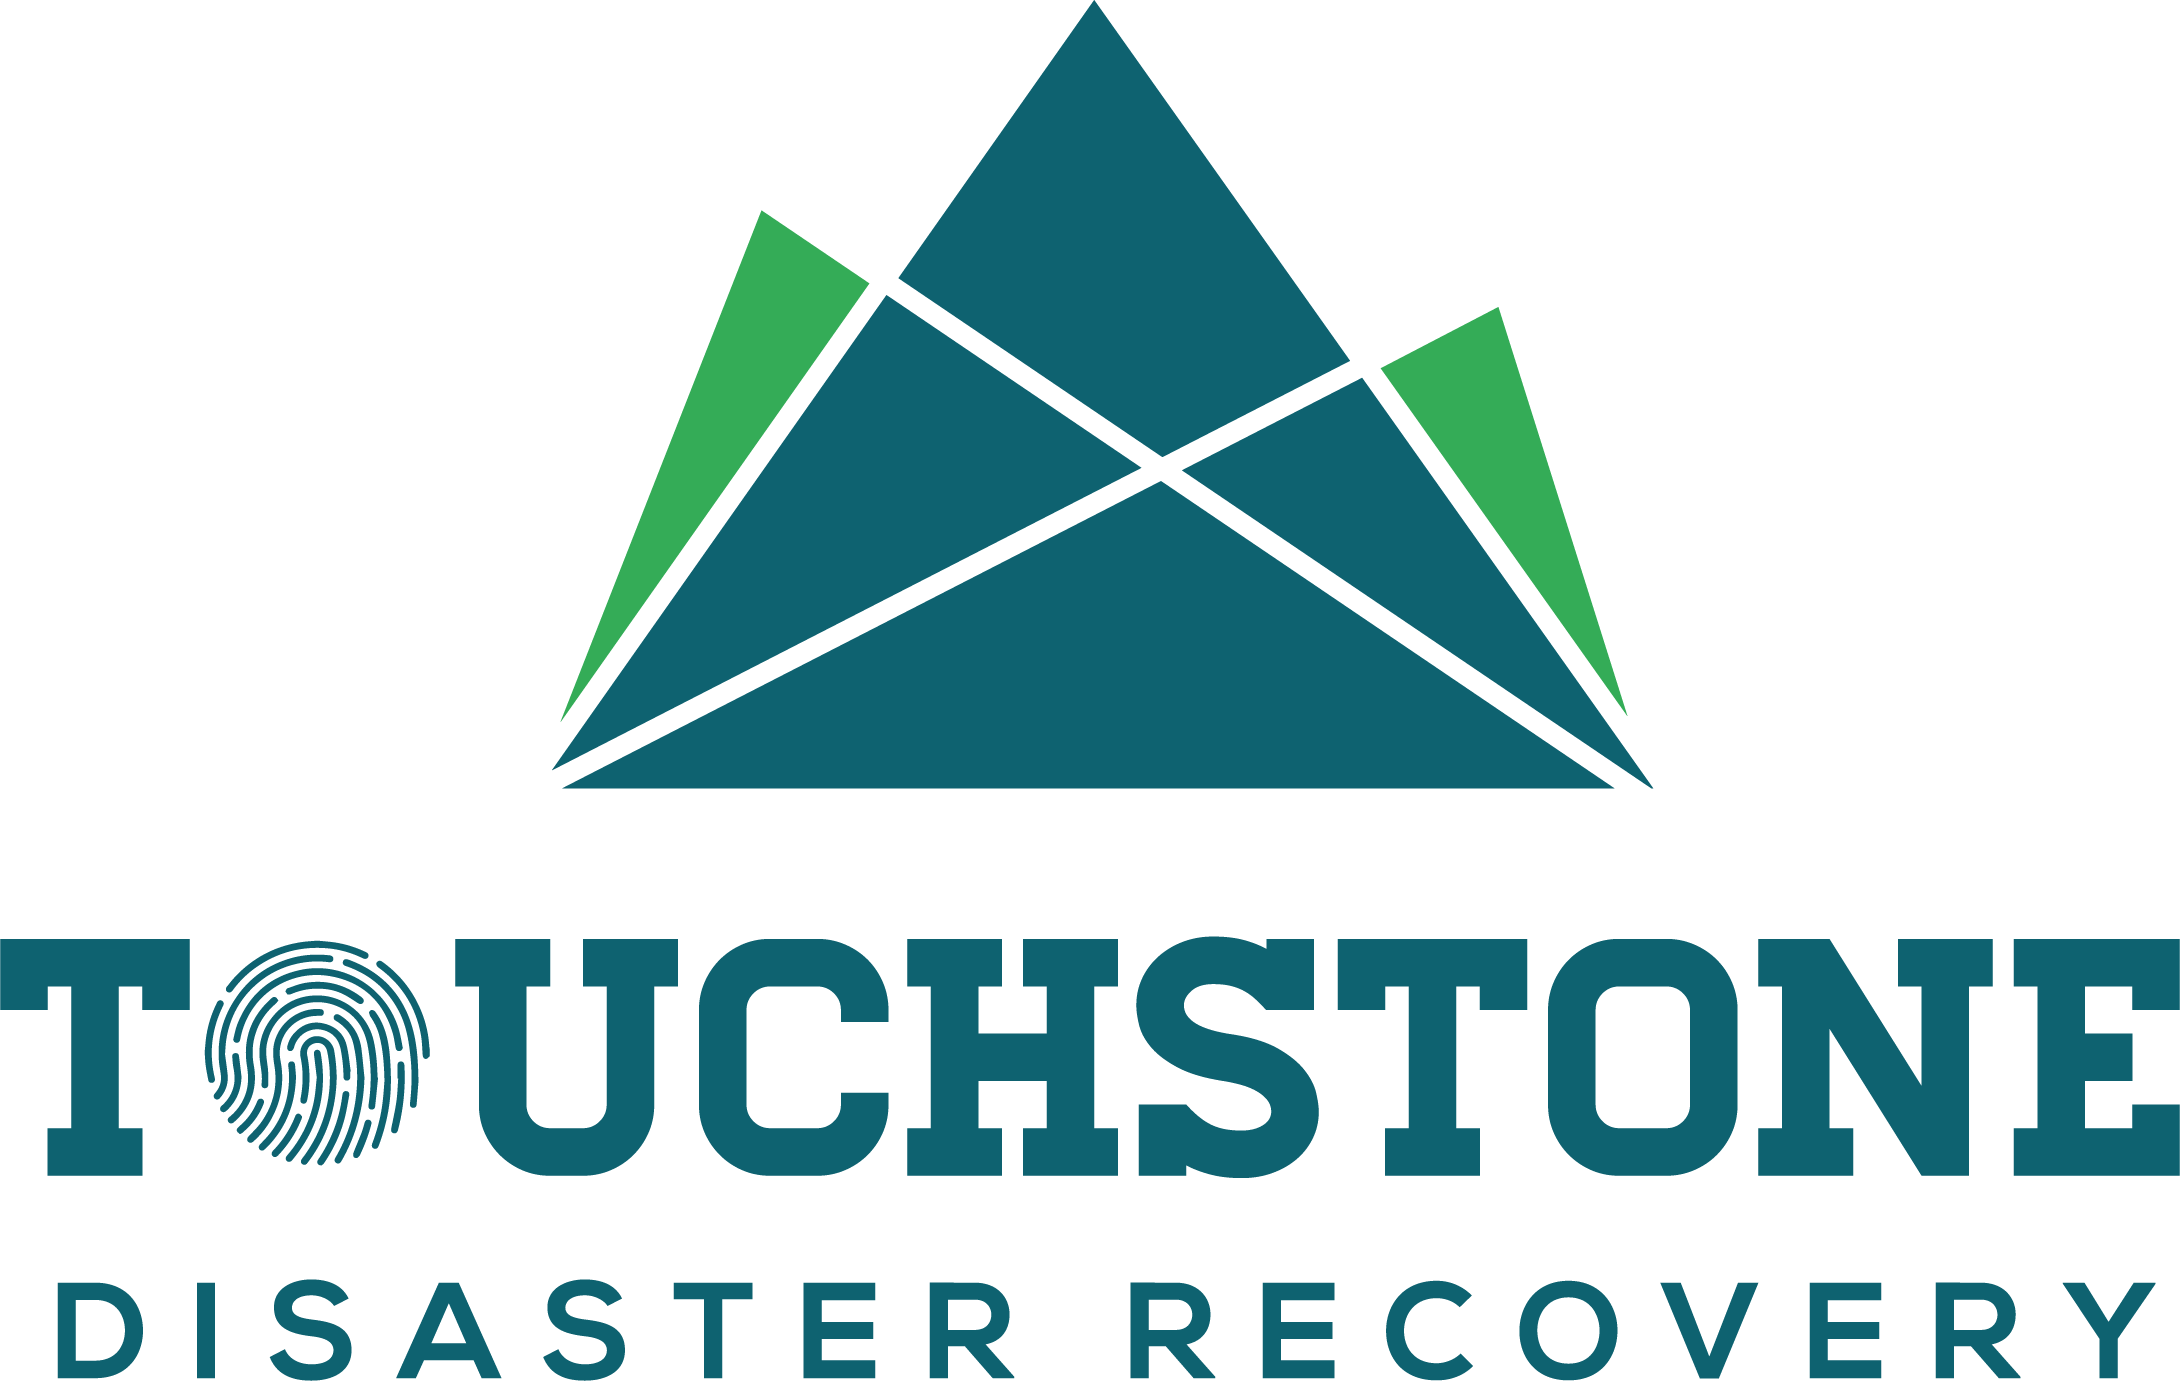 Touchstone Disaster Recovery - Disaster Recovery (2180x1381)